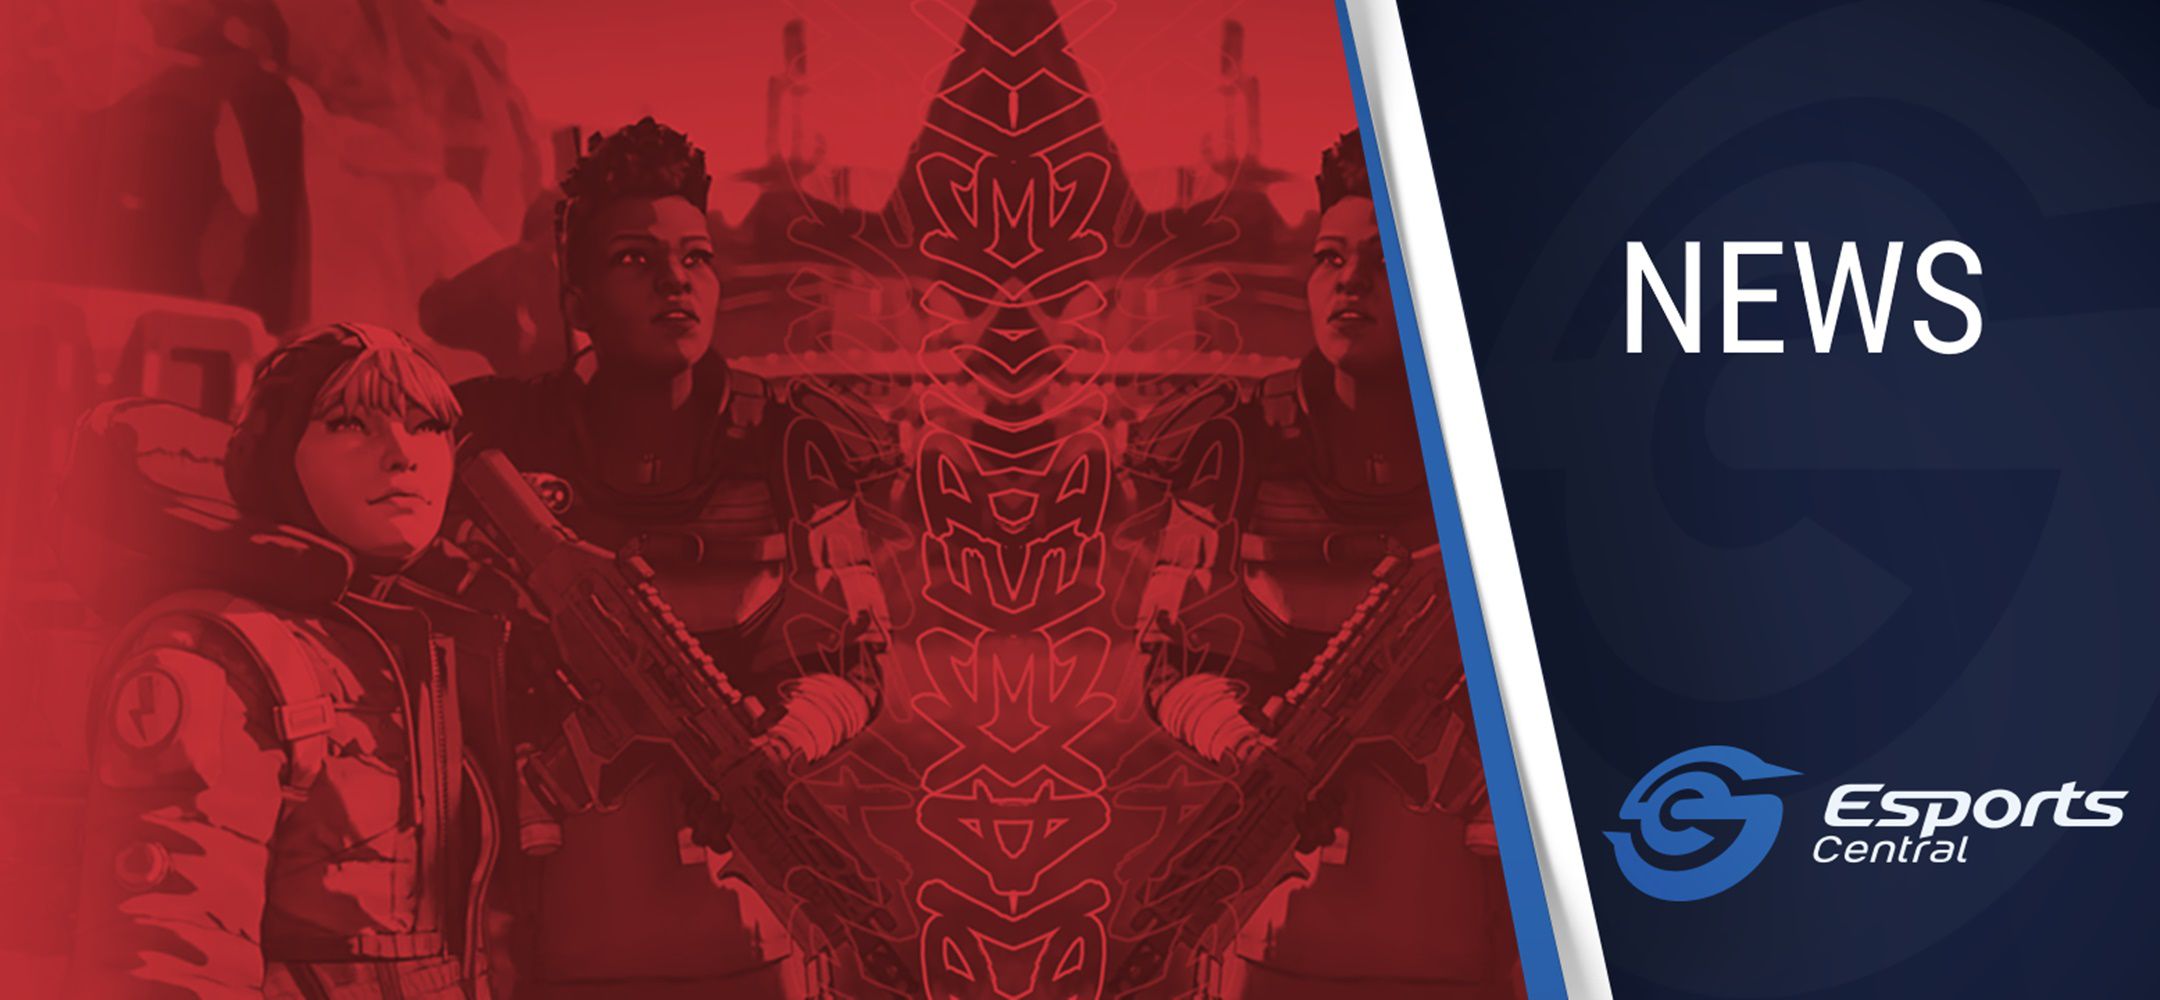 ATK Apex Legends LAN and Viewing Party announced Esports Central